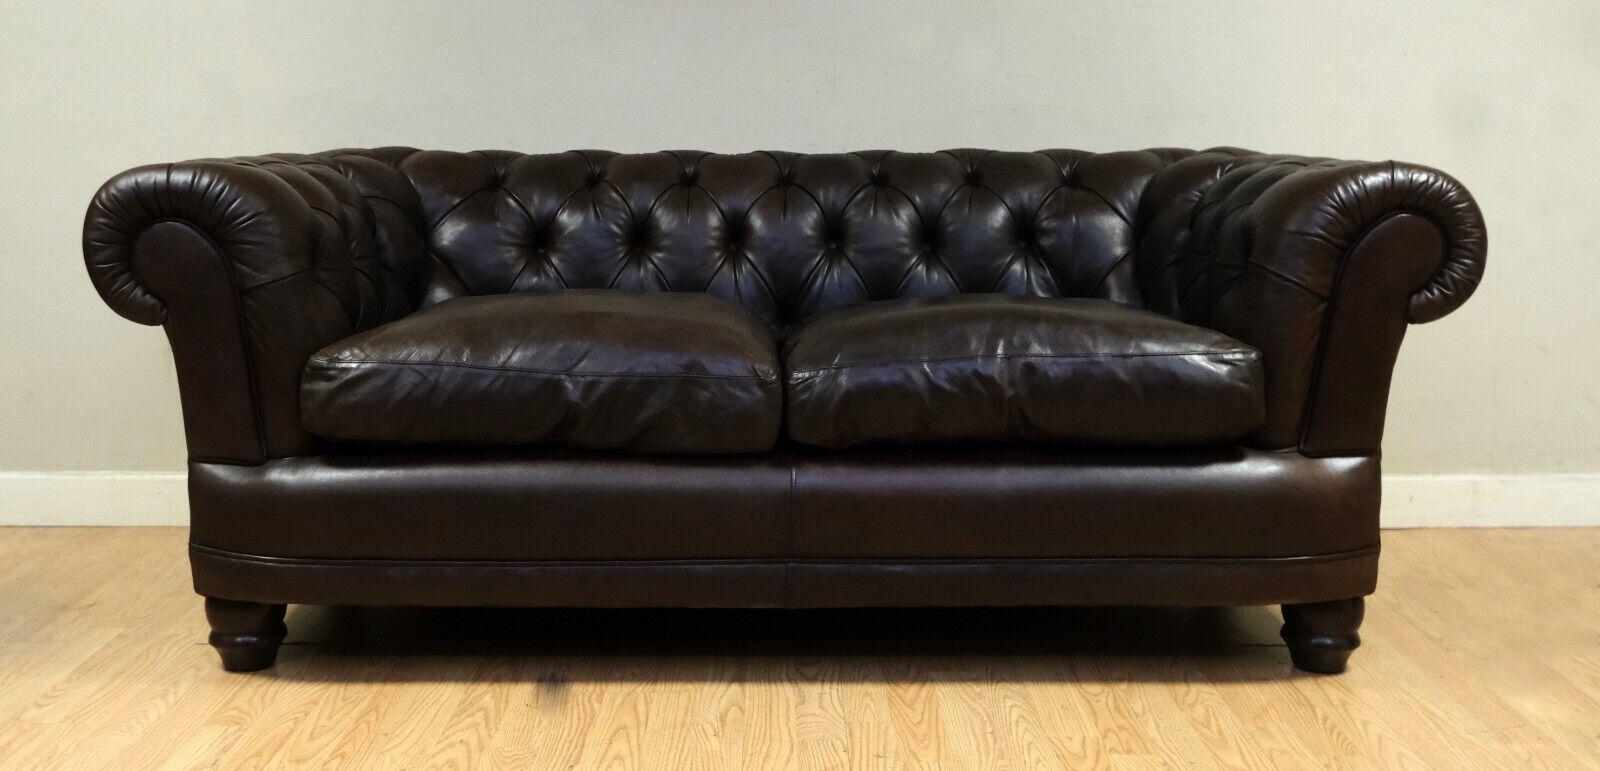 Hand-Crafted Choclate Brown Chesterfield Two Seater Leather Sofa Feather Filled Cushions